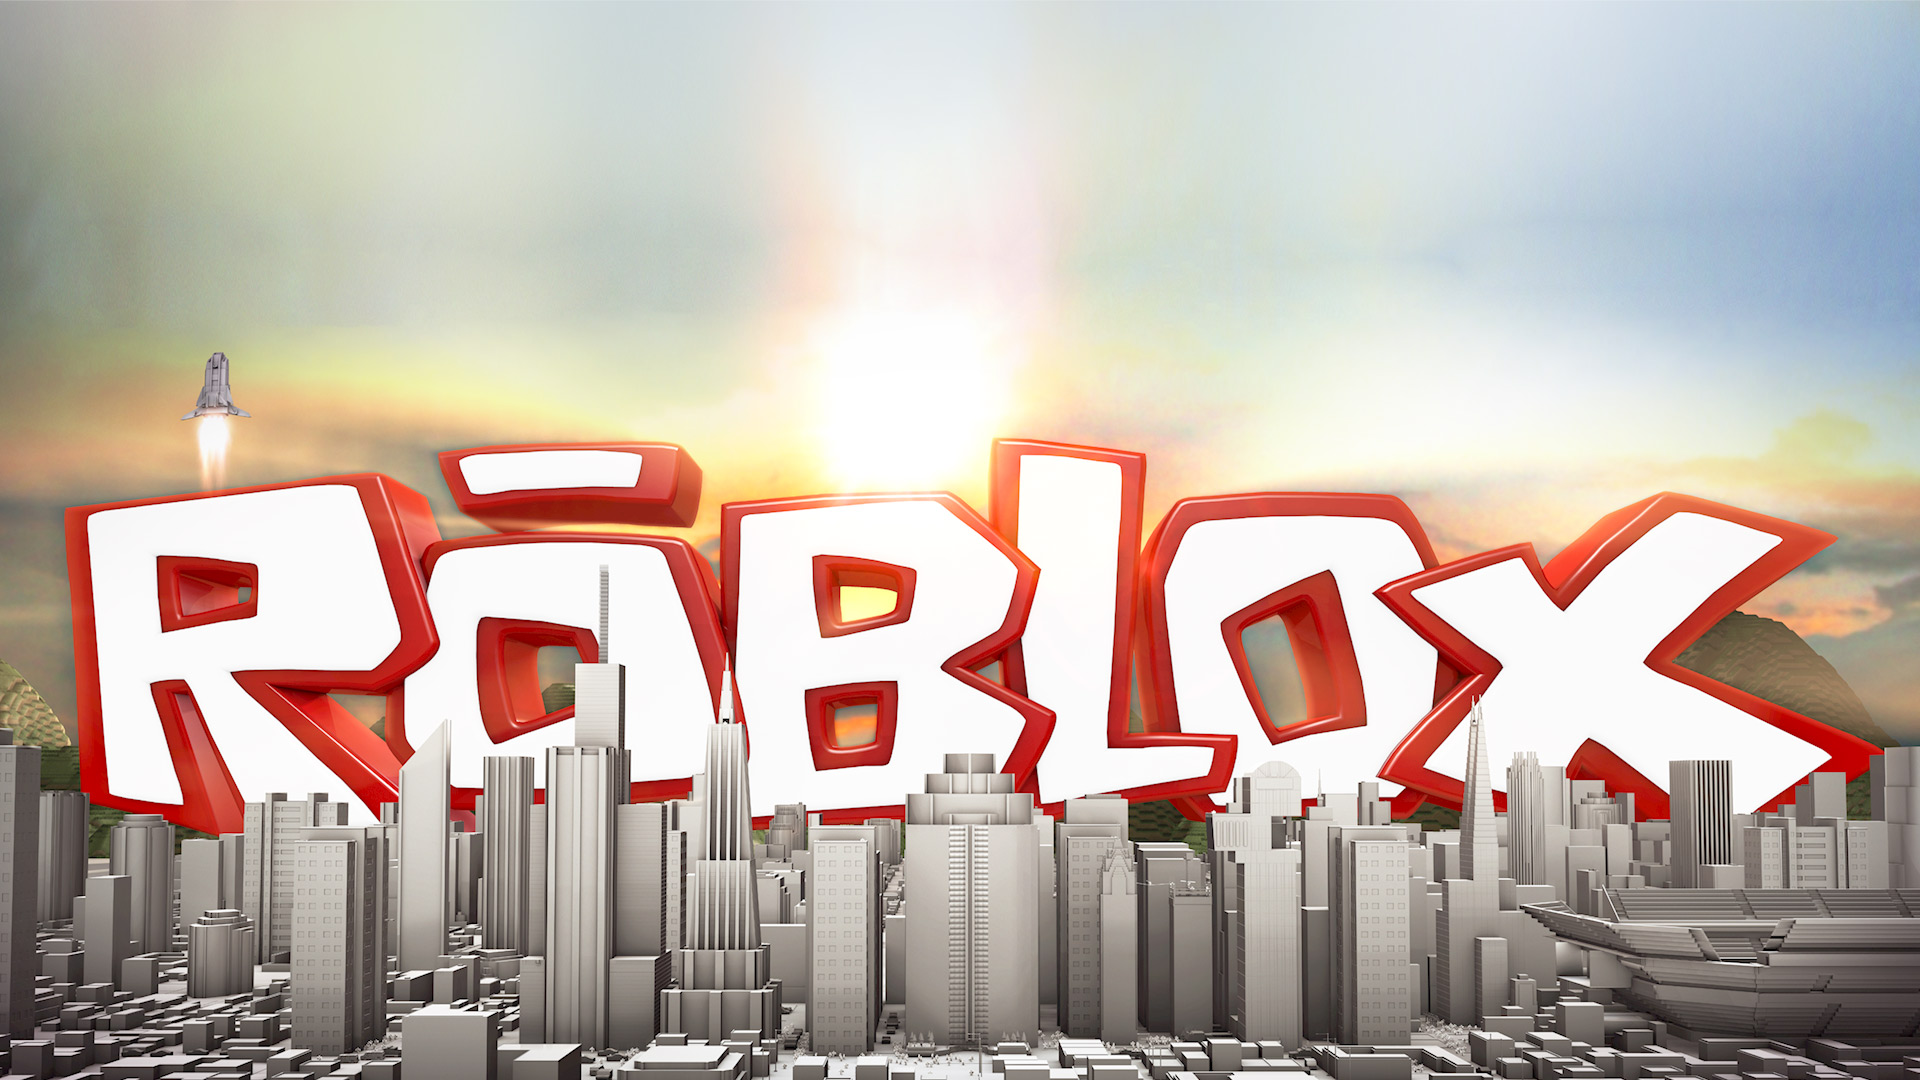 Tgdb Browse Game Roblox - how to get free bctbcobc on roblox 2018 unpatched